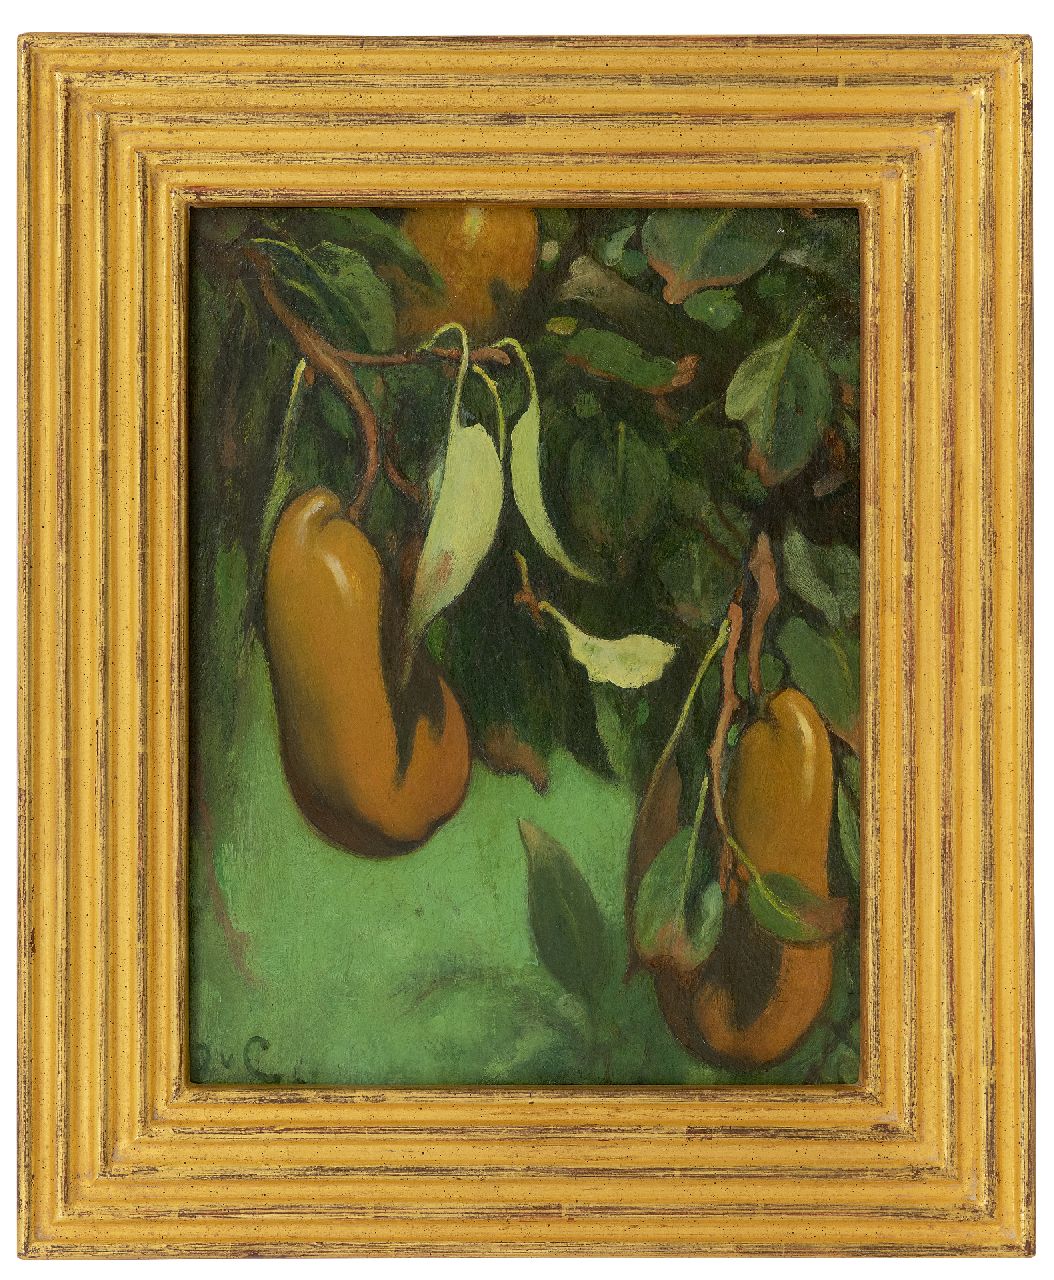 Looy J. van | Jacobus van Looy | Paintings offered for sale | Gourd pears, oil on panel 35.0 x 26.7 cm, signed l.l. with initials